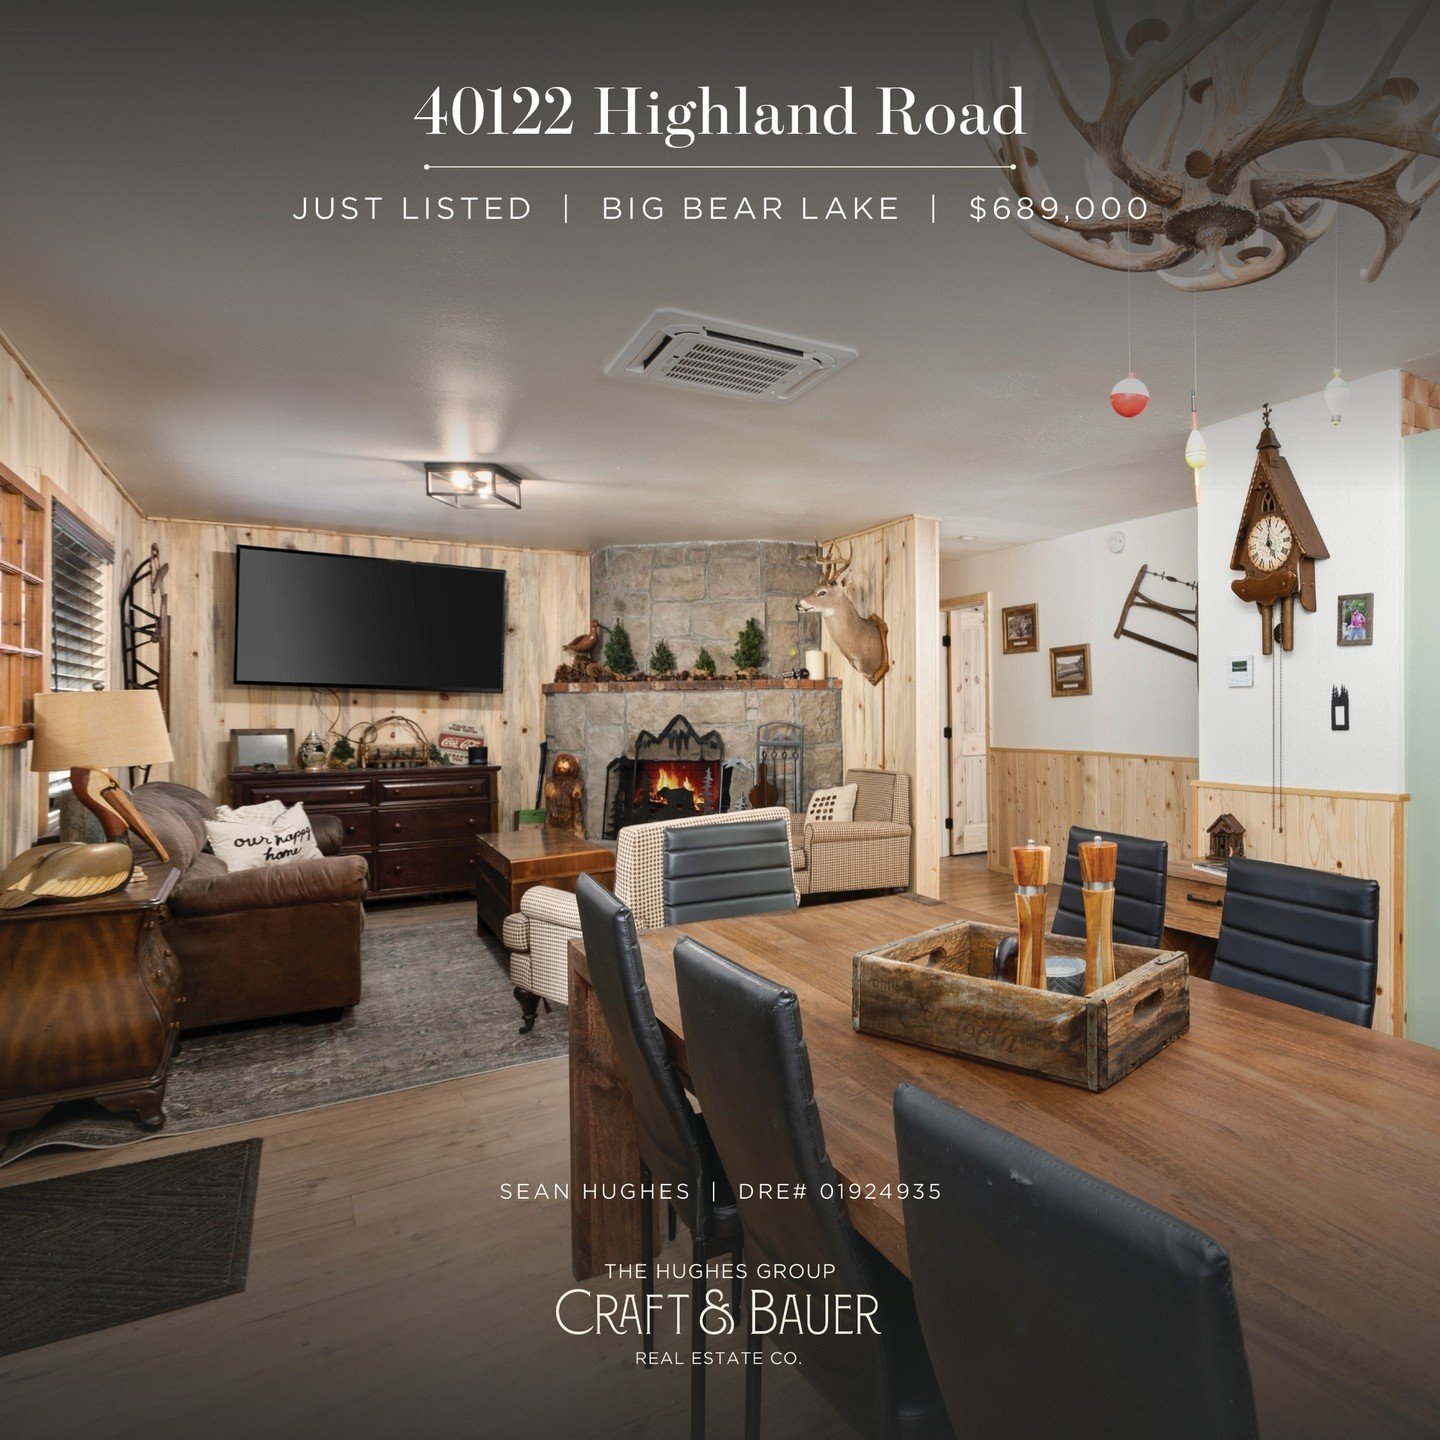 JUST LISTED 👉 A stunning real estate gem nestled in the heart of Big Bear Lake!⁠
⁠
🏡 40122 Highland Road⁠
📍Big Bear Lake, CA⁠
💰 $689,000⁠
⁠
This beautifully renovated property offers a perfect blend of modern comfort and rustic charm. The fully f